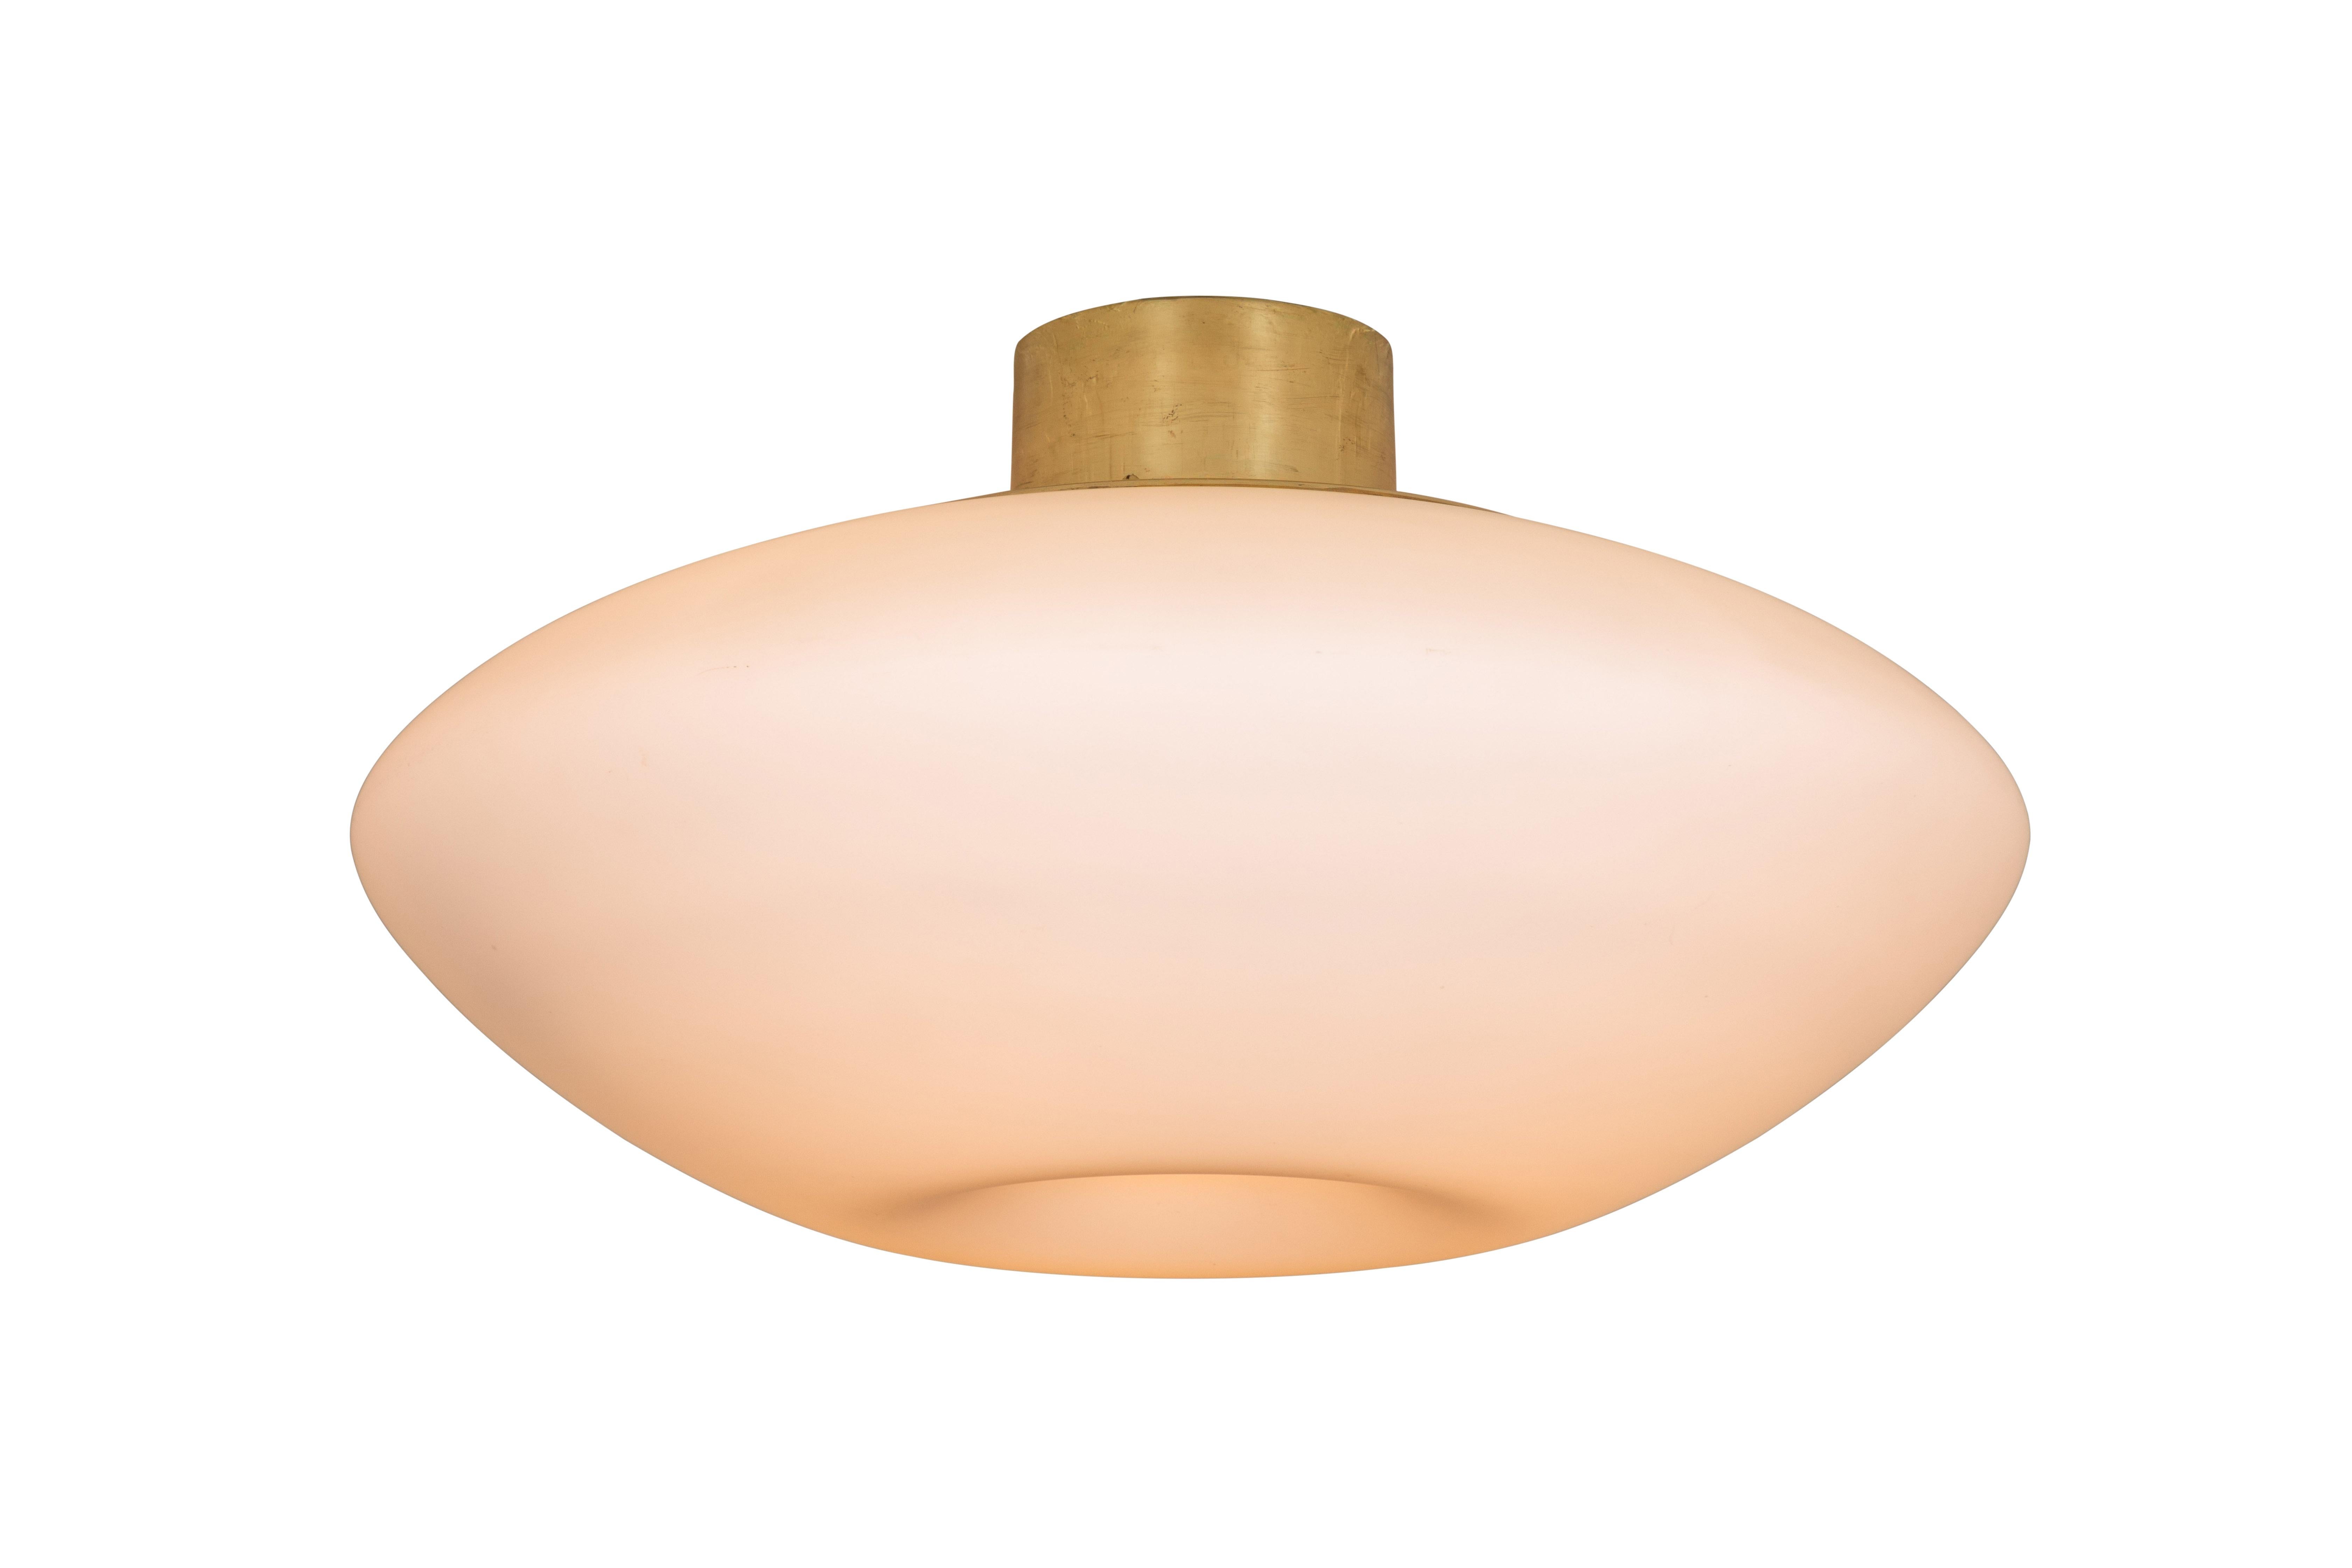 Large 1950s Lisa Johansson-Pape glass and brass ceiling lamp for Orno. Executed in blown opaline glass and brass. Manufactured by Orno Oy, Finland. Stamped with manufacturer's mark.
 
Not UL listed, but available from authorized 3rd party vendor